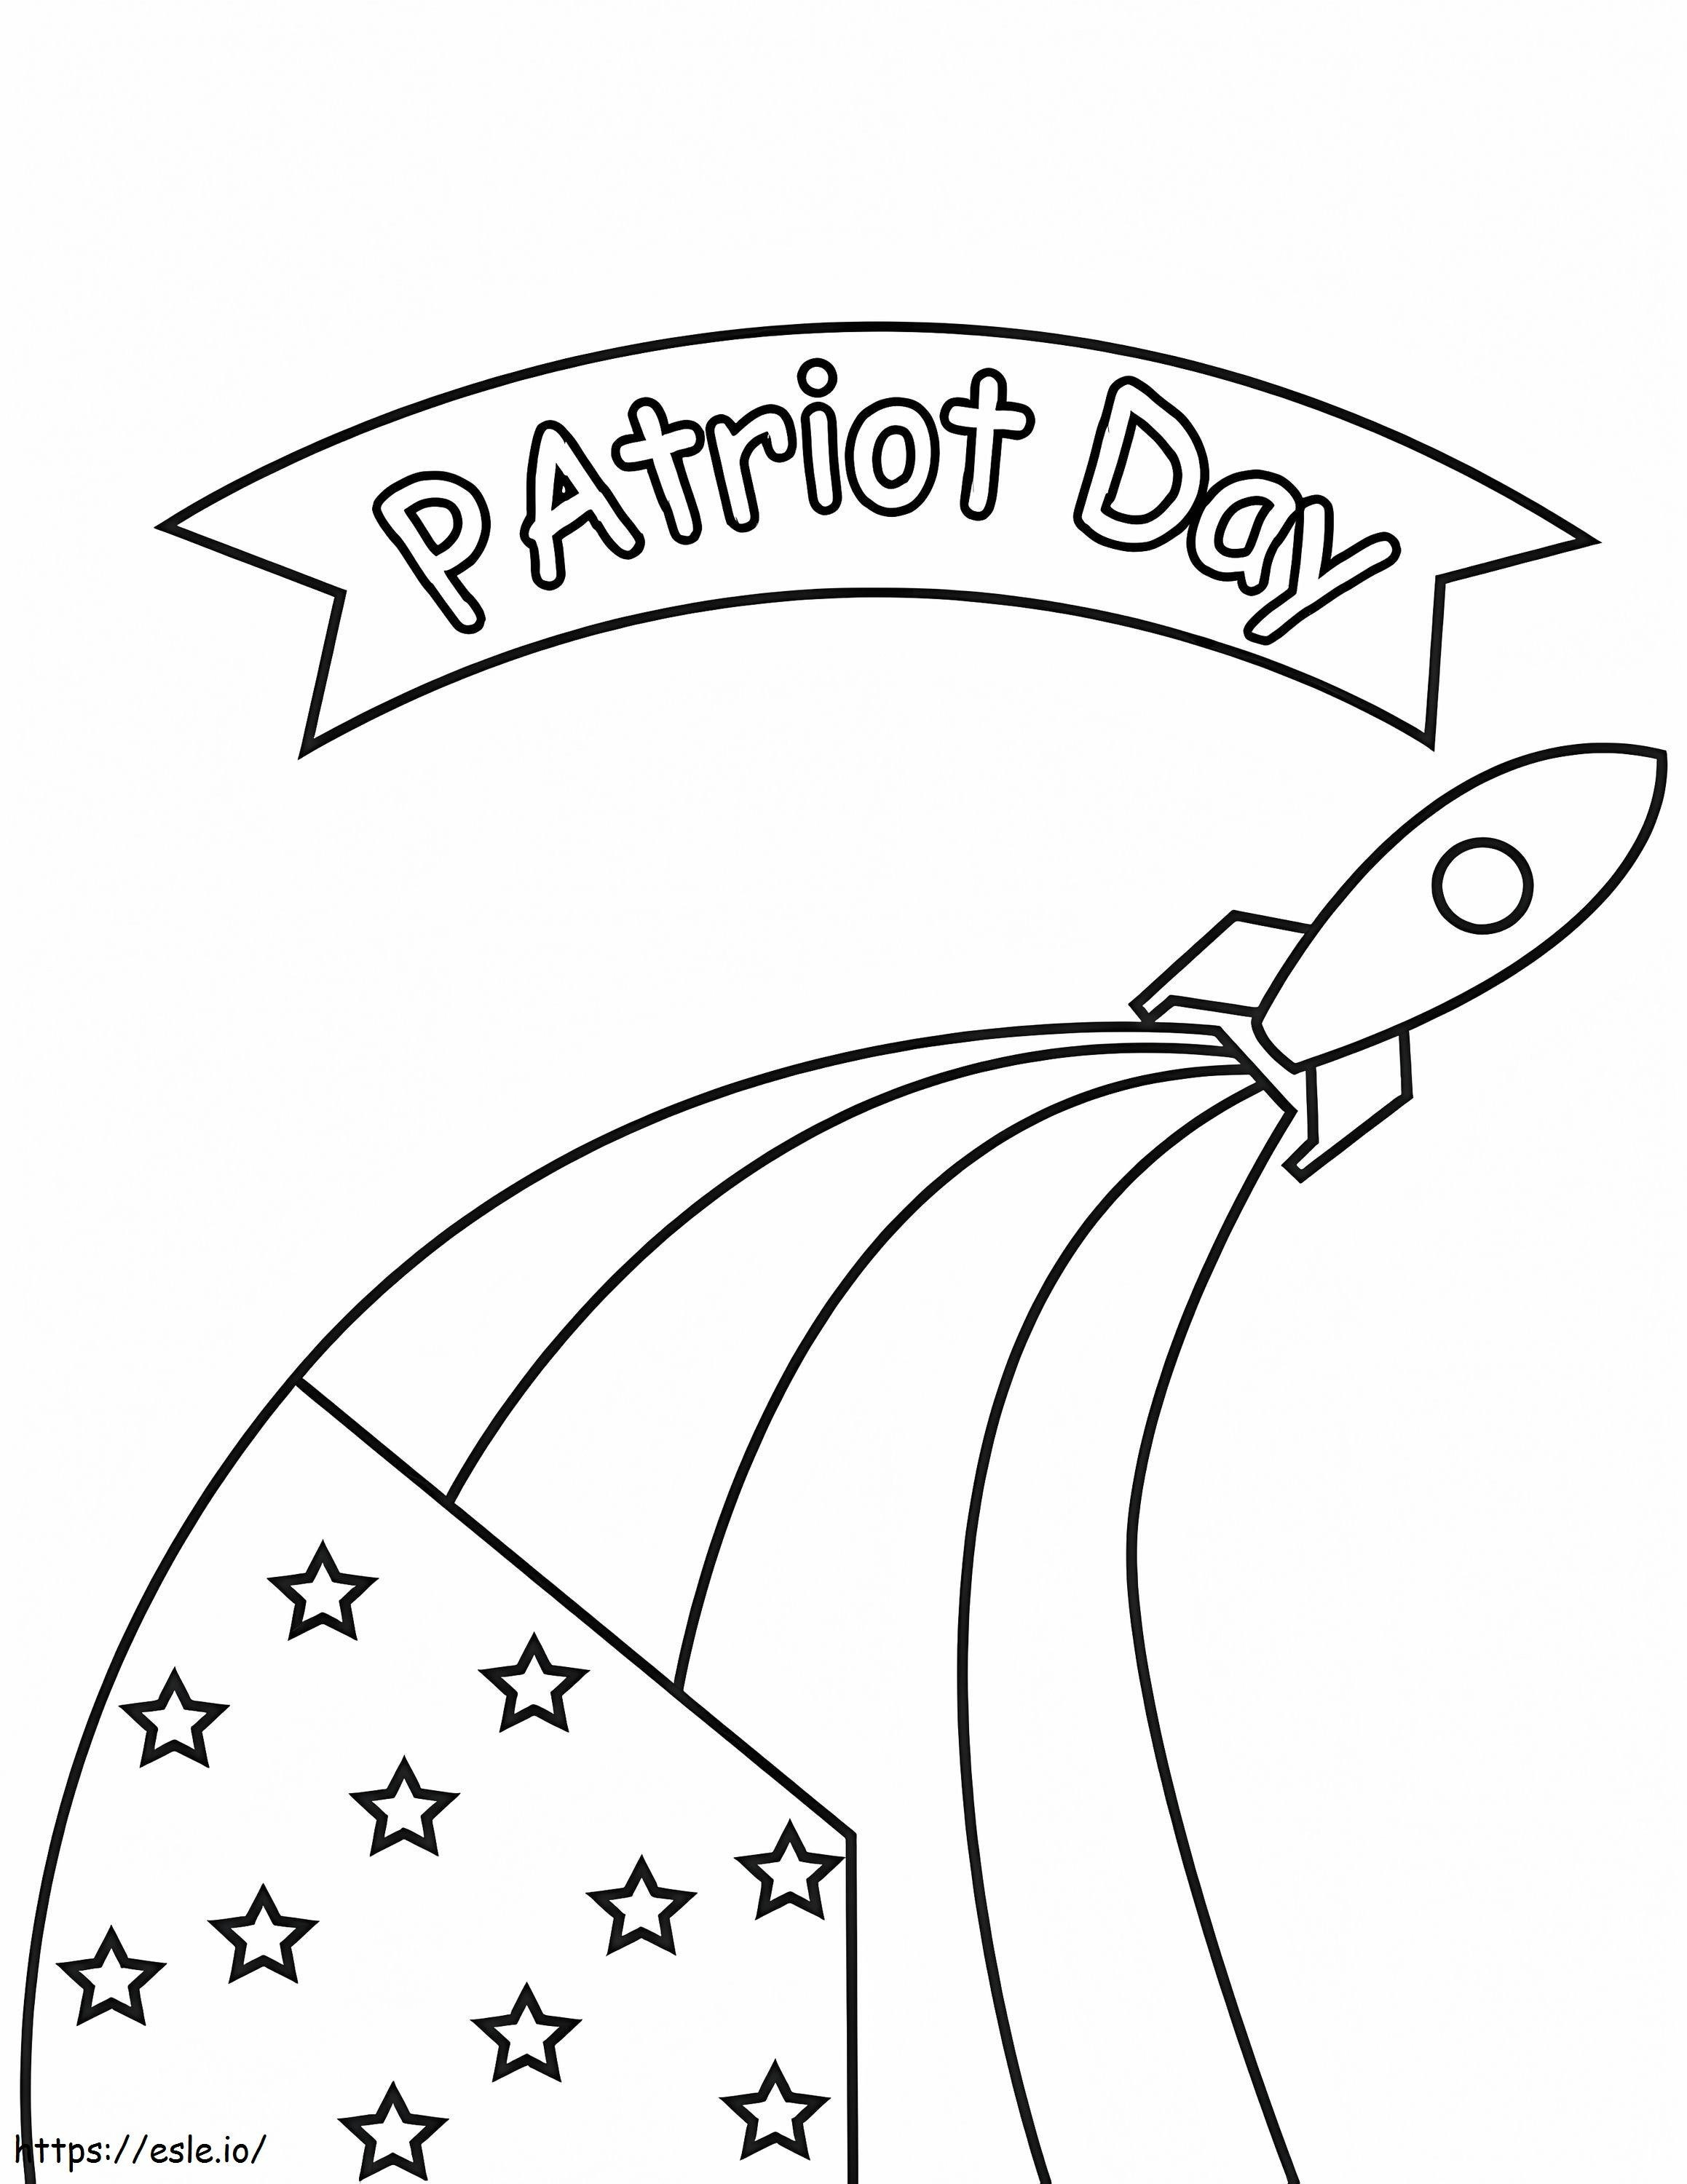 Patriot Day coloring page